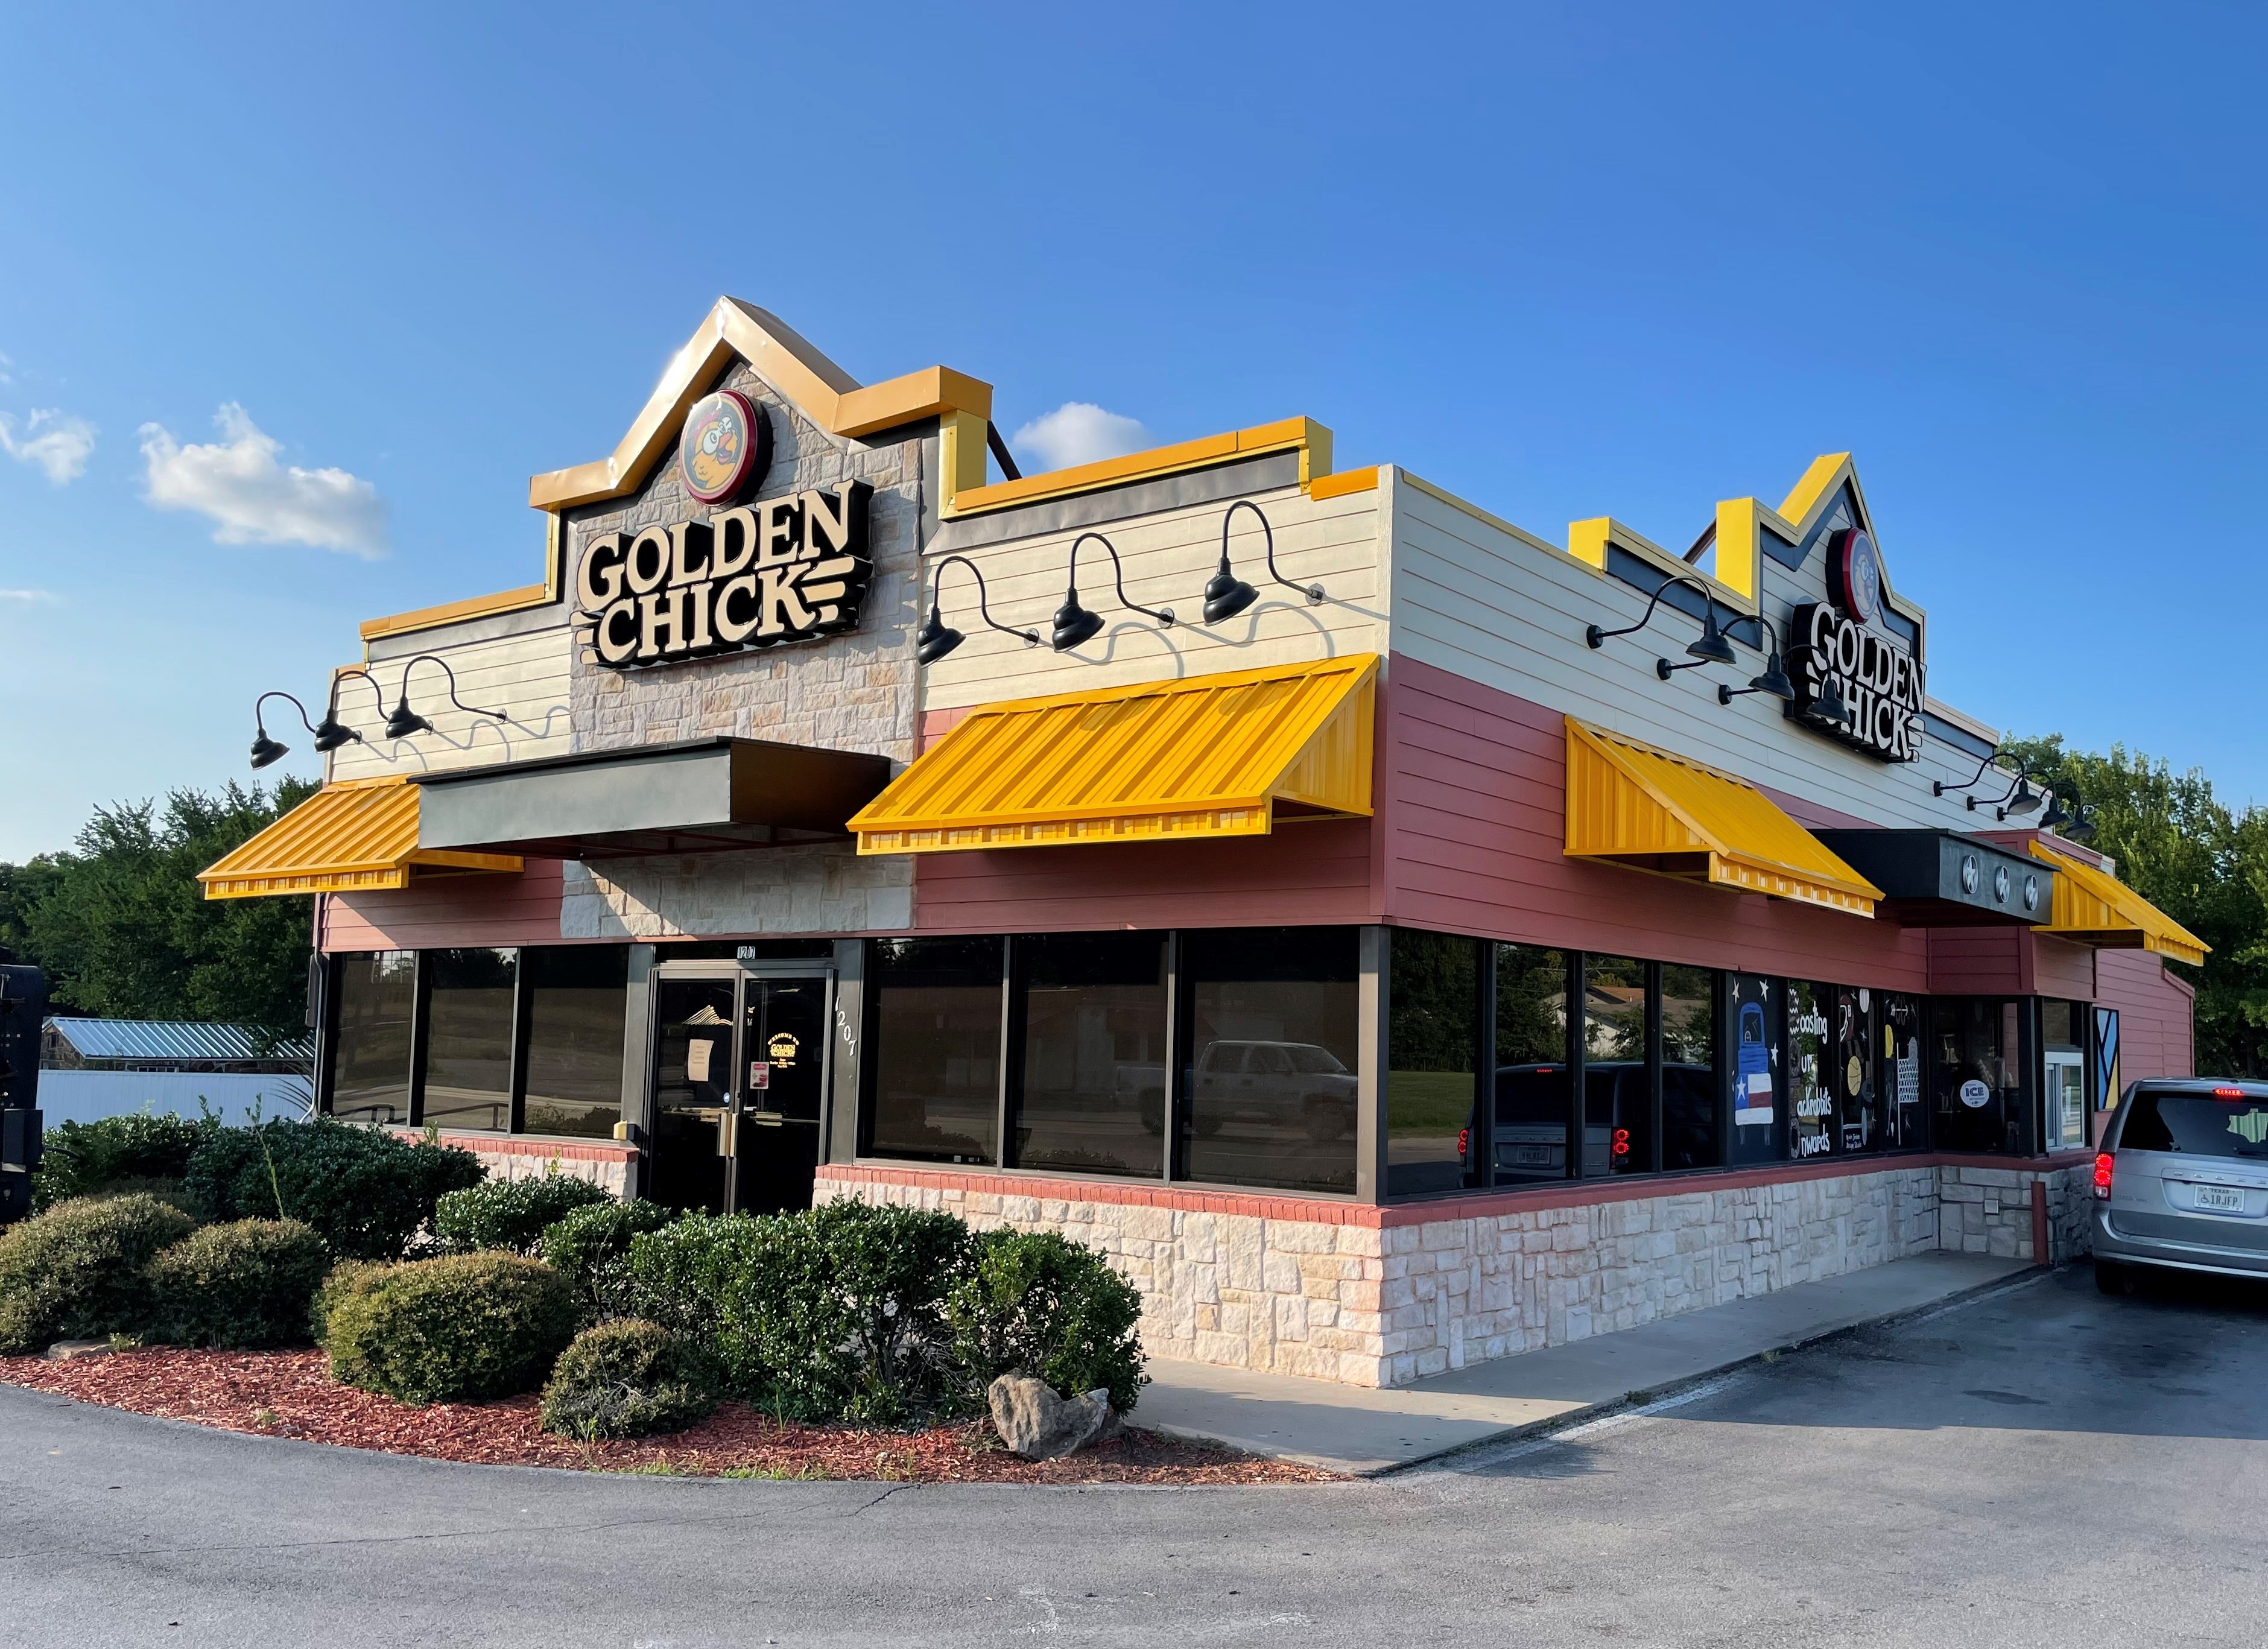 Golden Chick storefront.  Your local Golden Chick fast food restaurant in Bowie, Texas